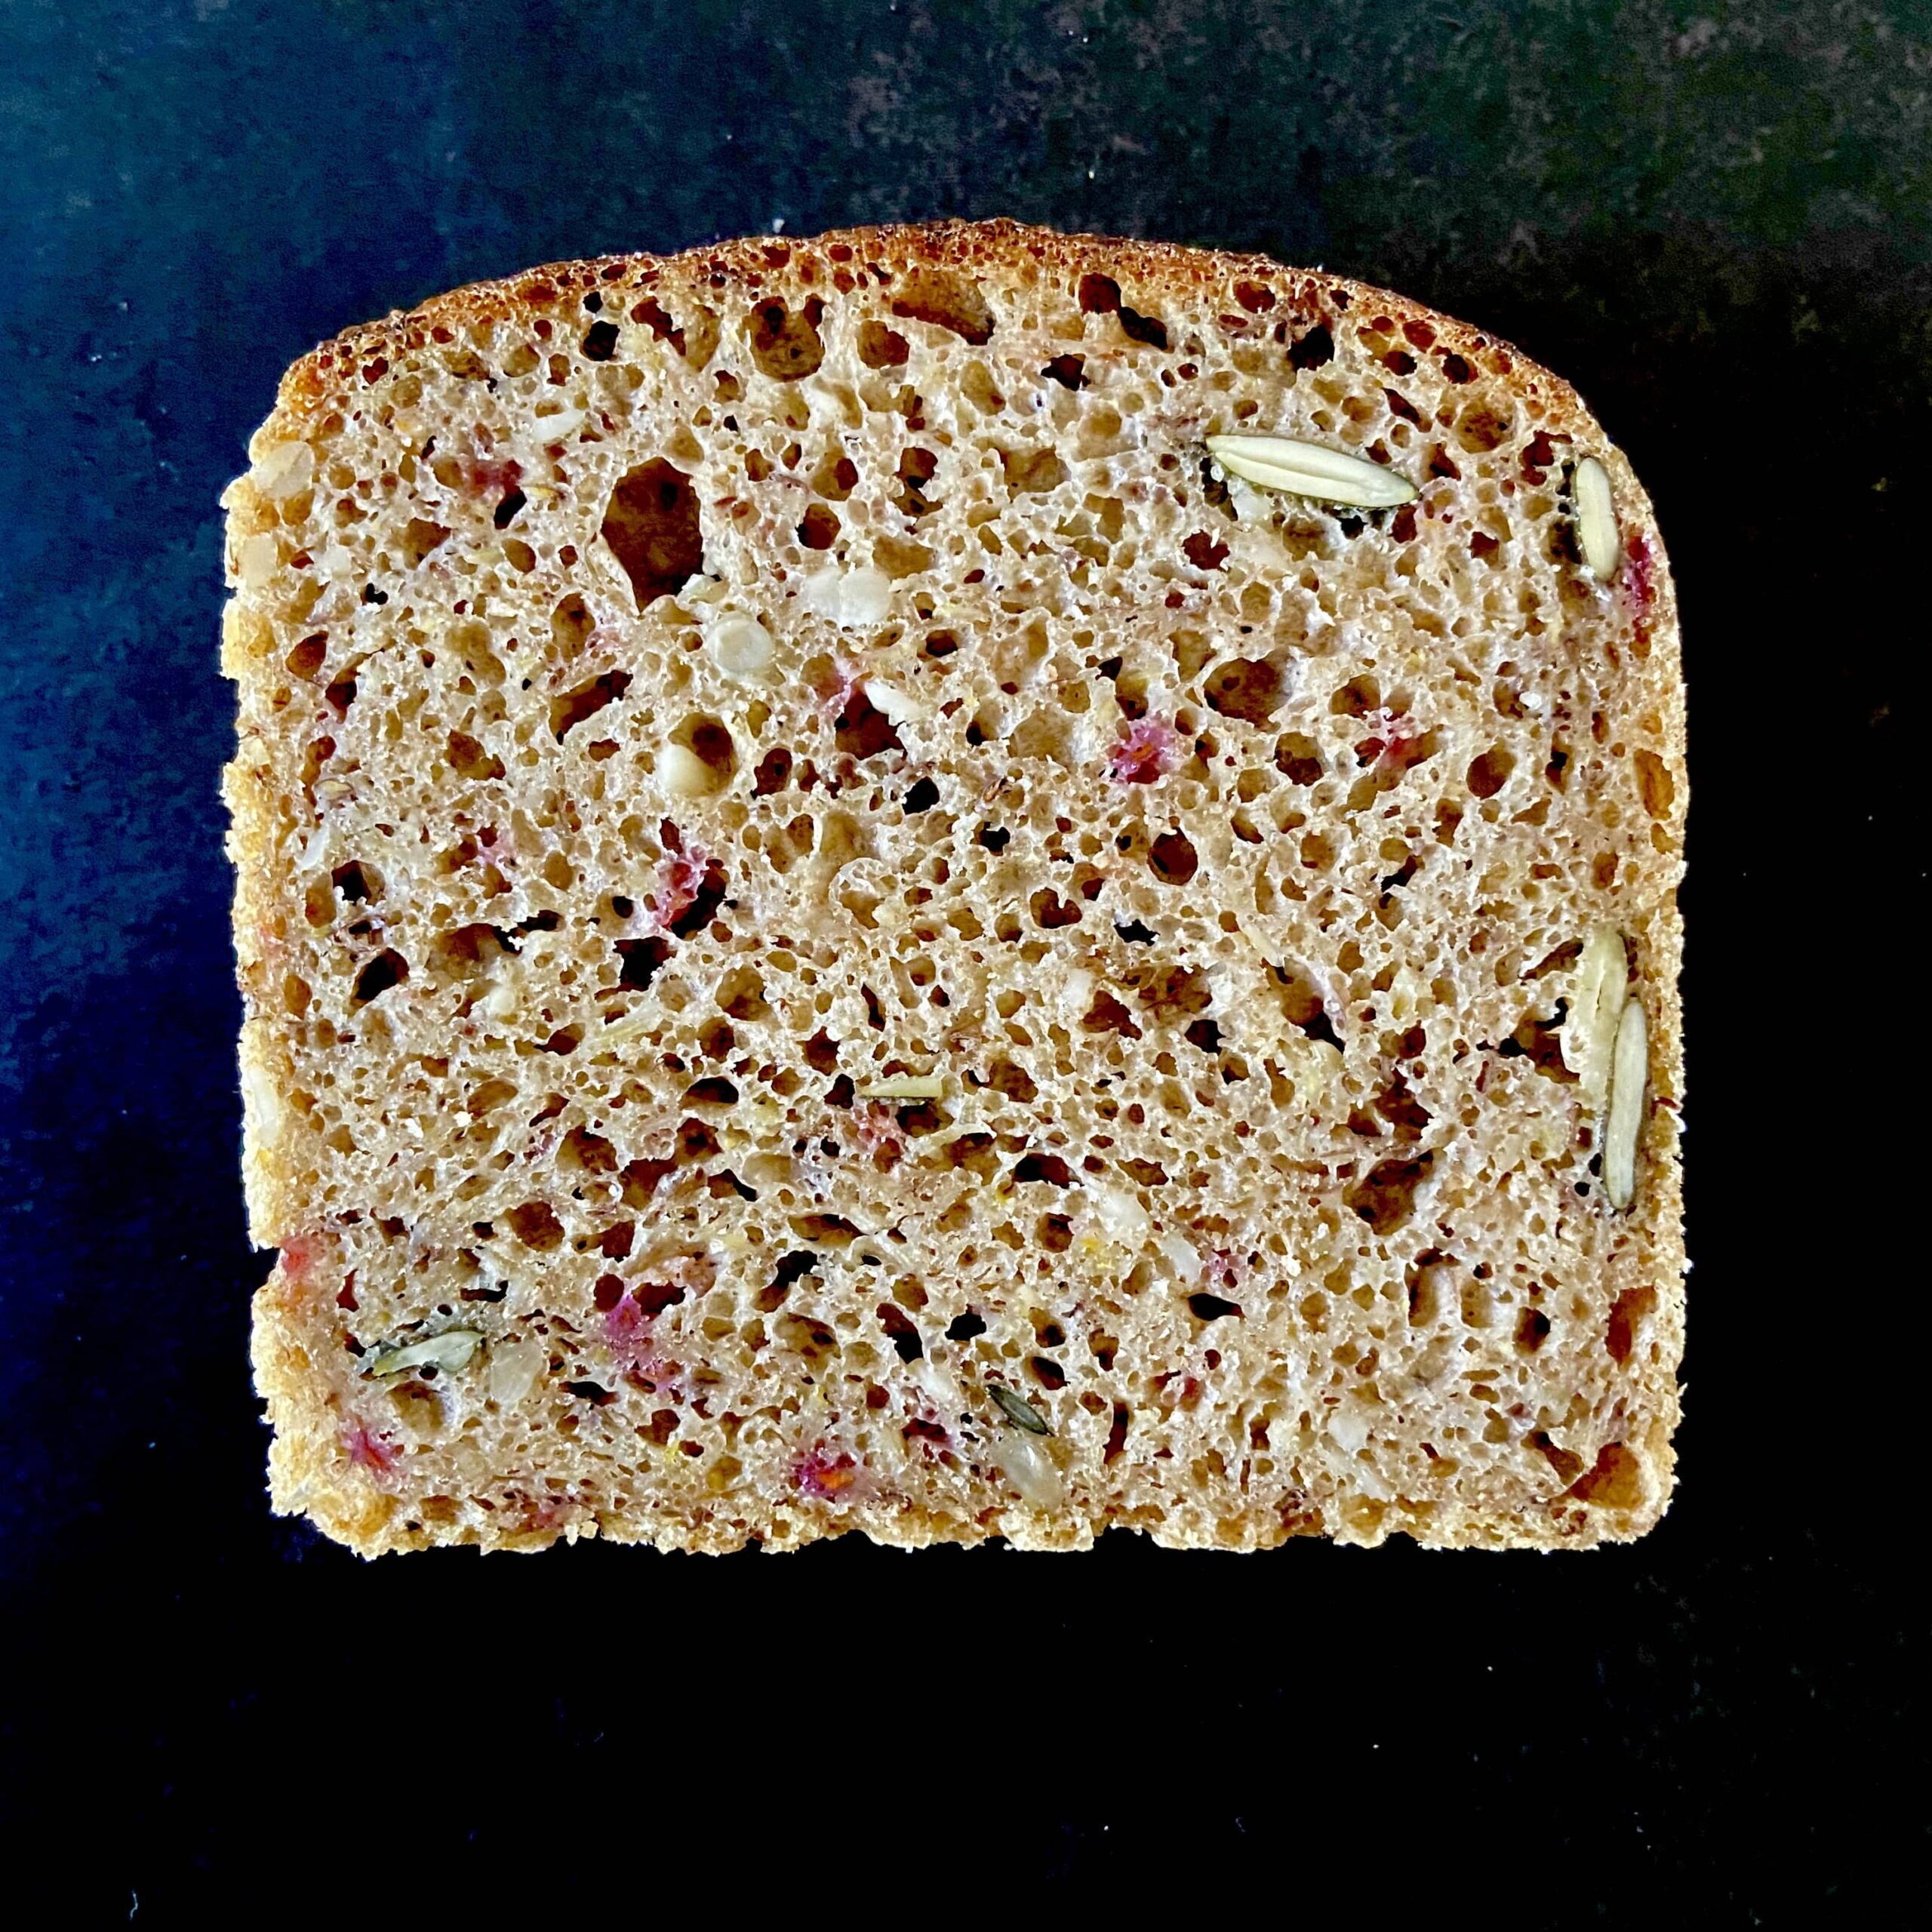 The power carrot bread (a carrots and seeds whole spelt bread)